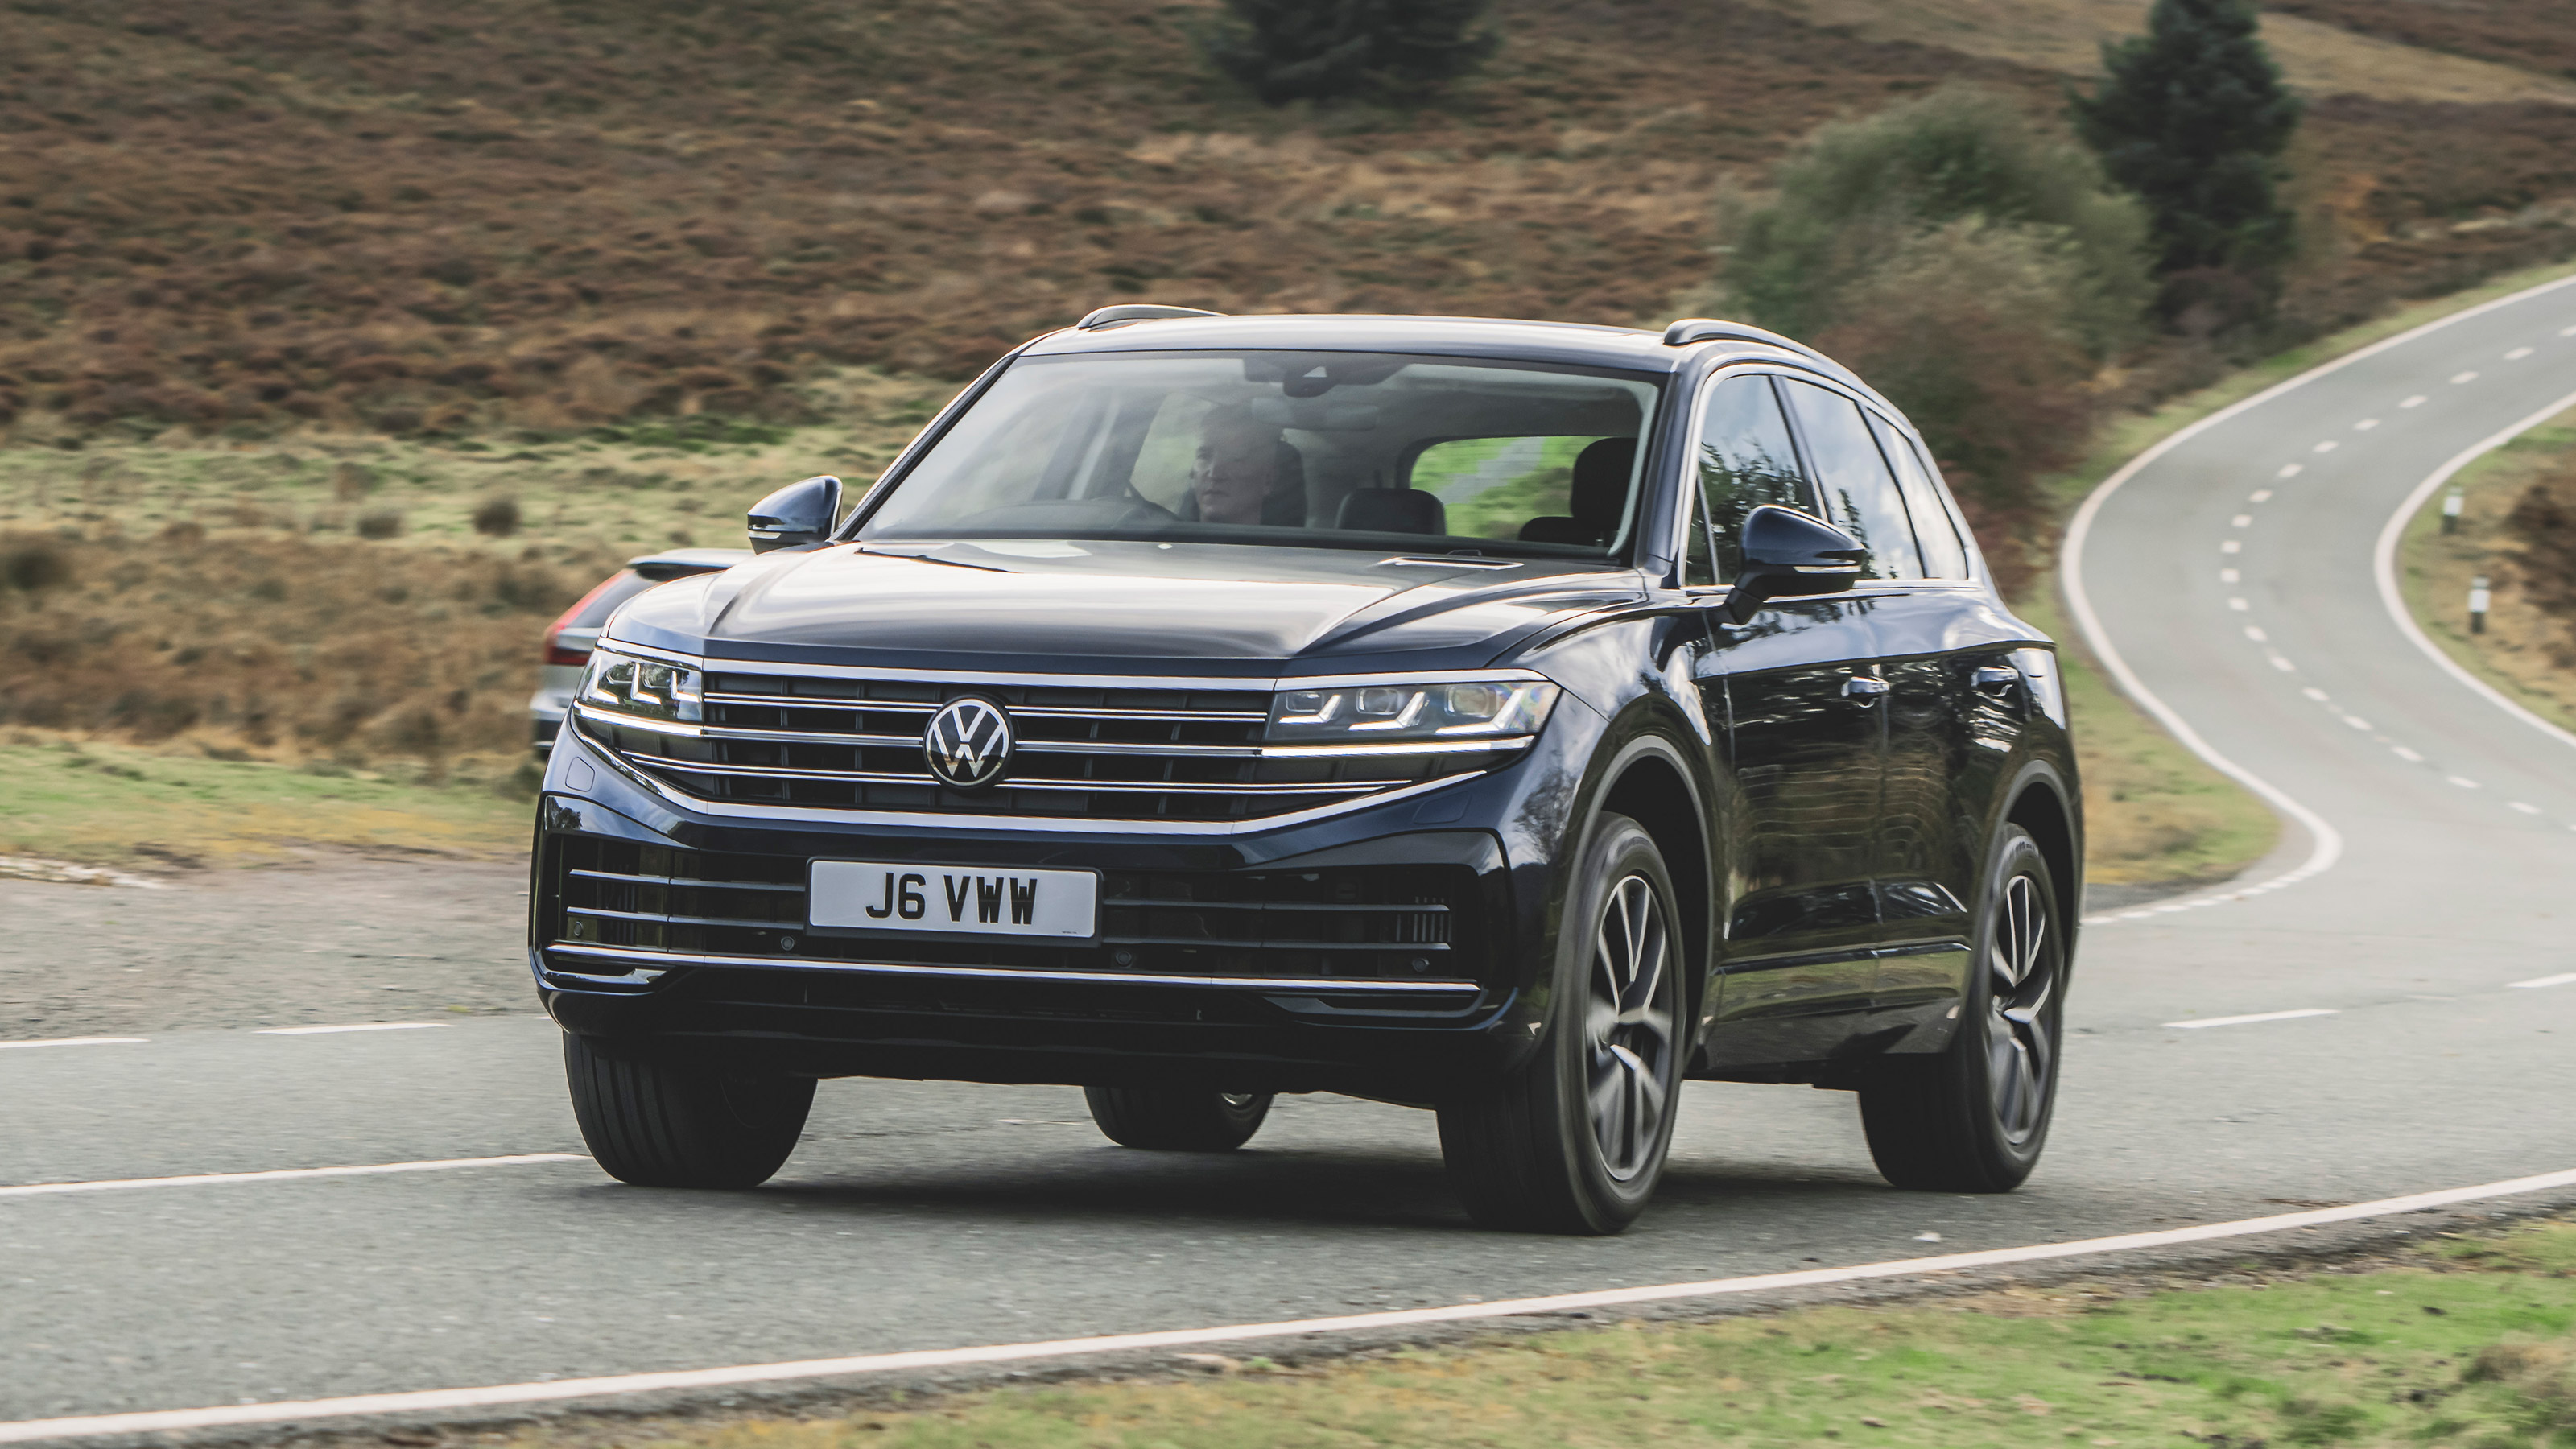 Volkswagen Touareg review - sublime interior but sedate to drive